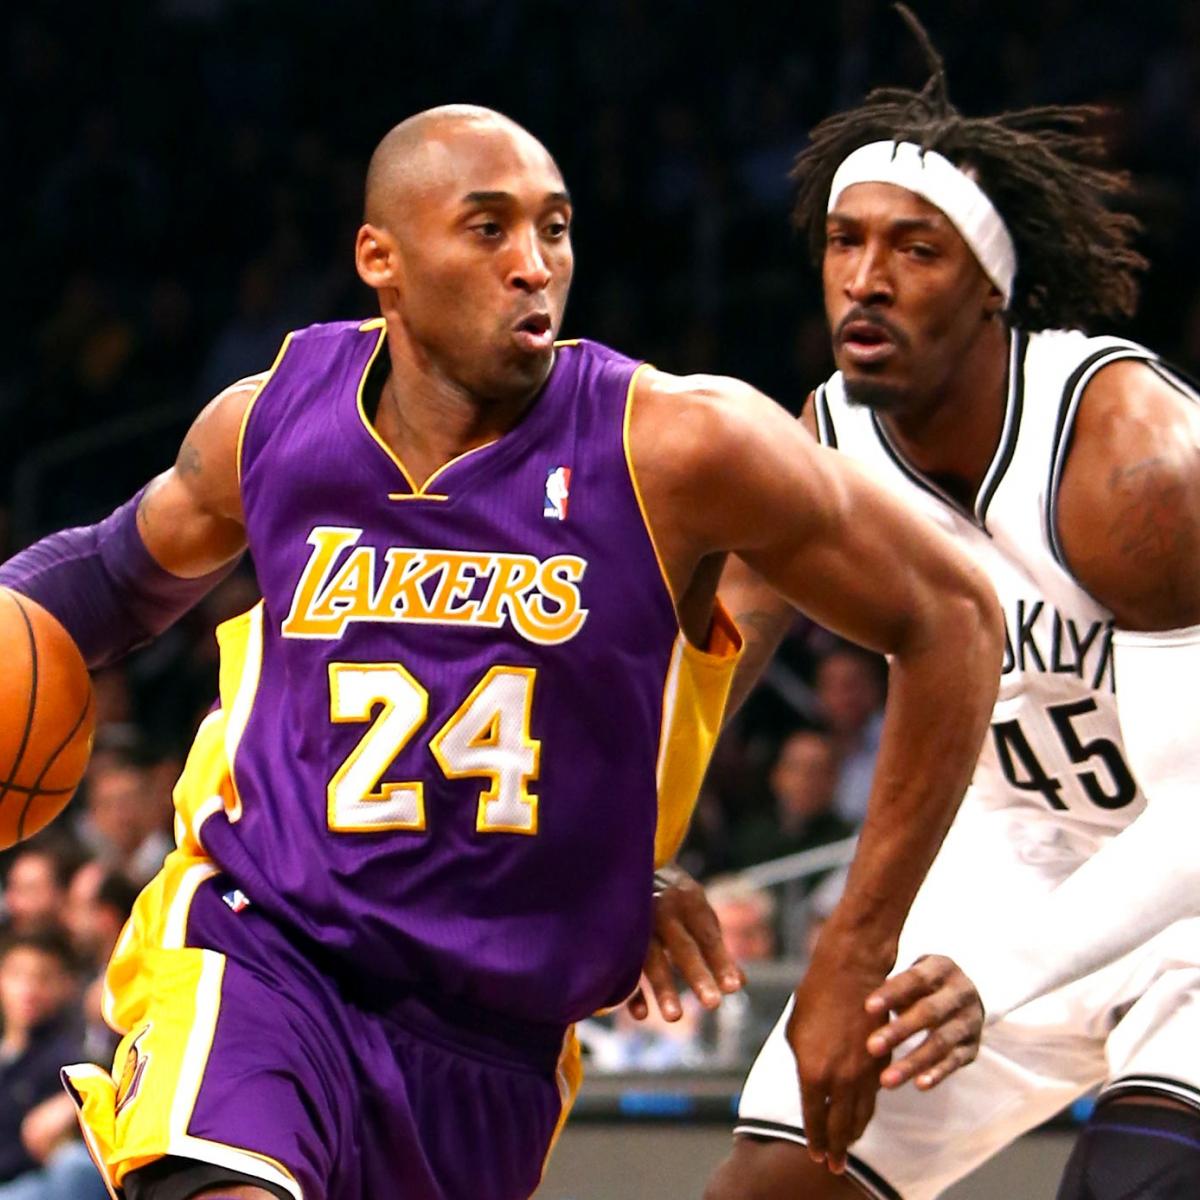 Lakers vs. Nets: Live Analysis, Score Updates and Highlights | Bleacher Report ...